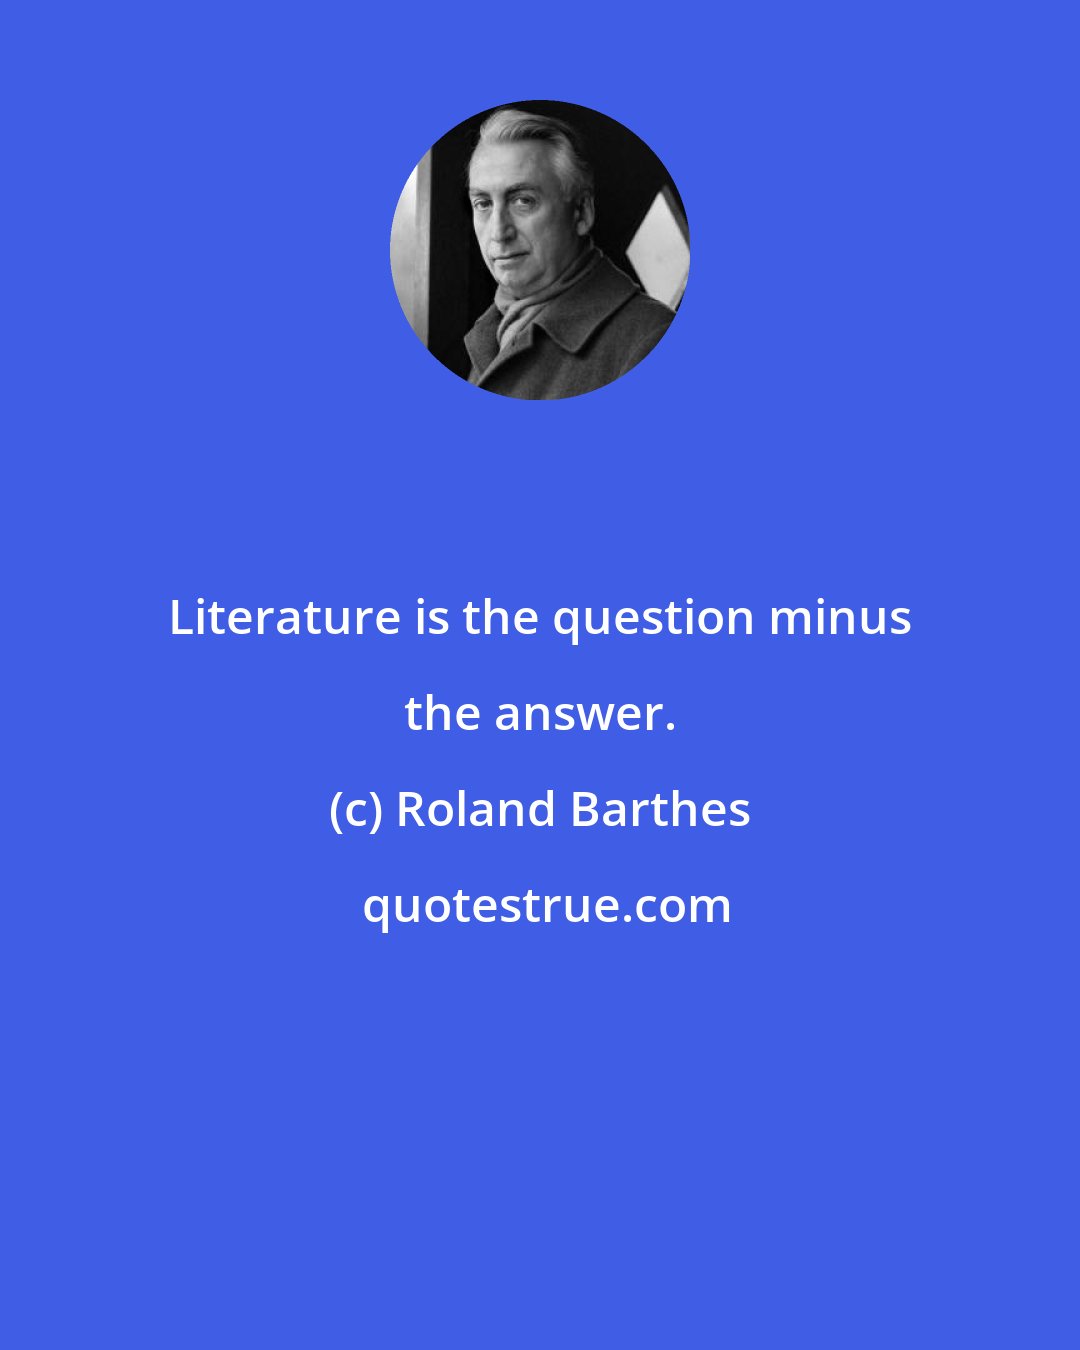 Roland Barthes: Literature is the question minus the answer.